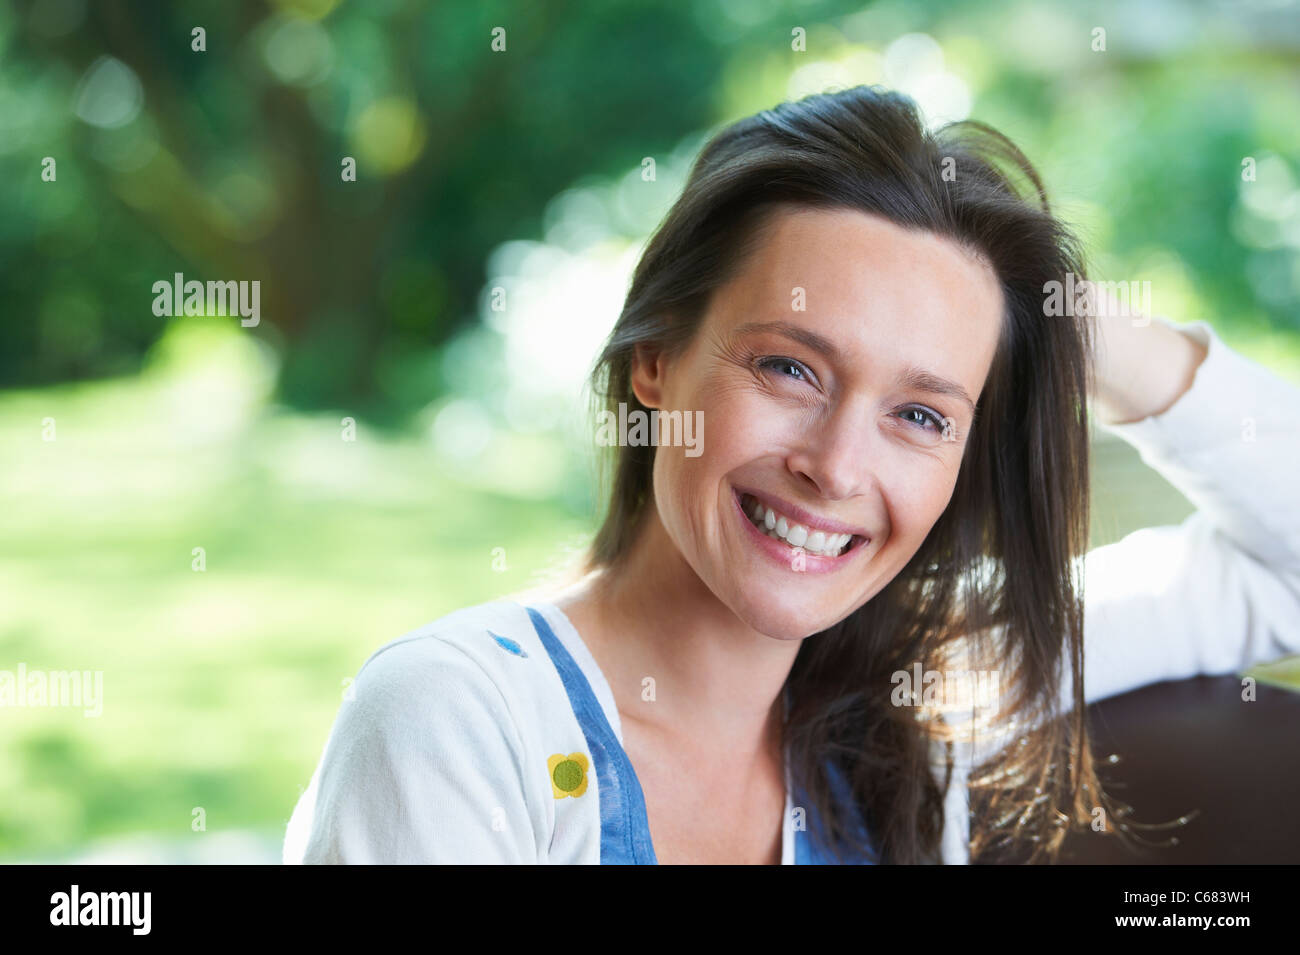 Smiling woman sitting outdoors Banque D'Images